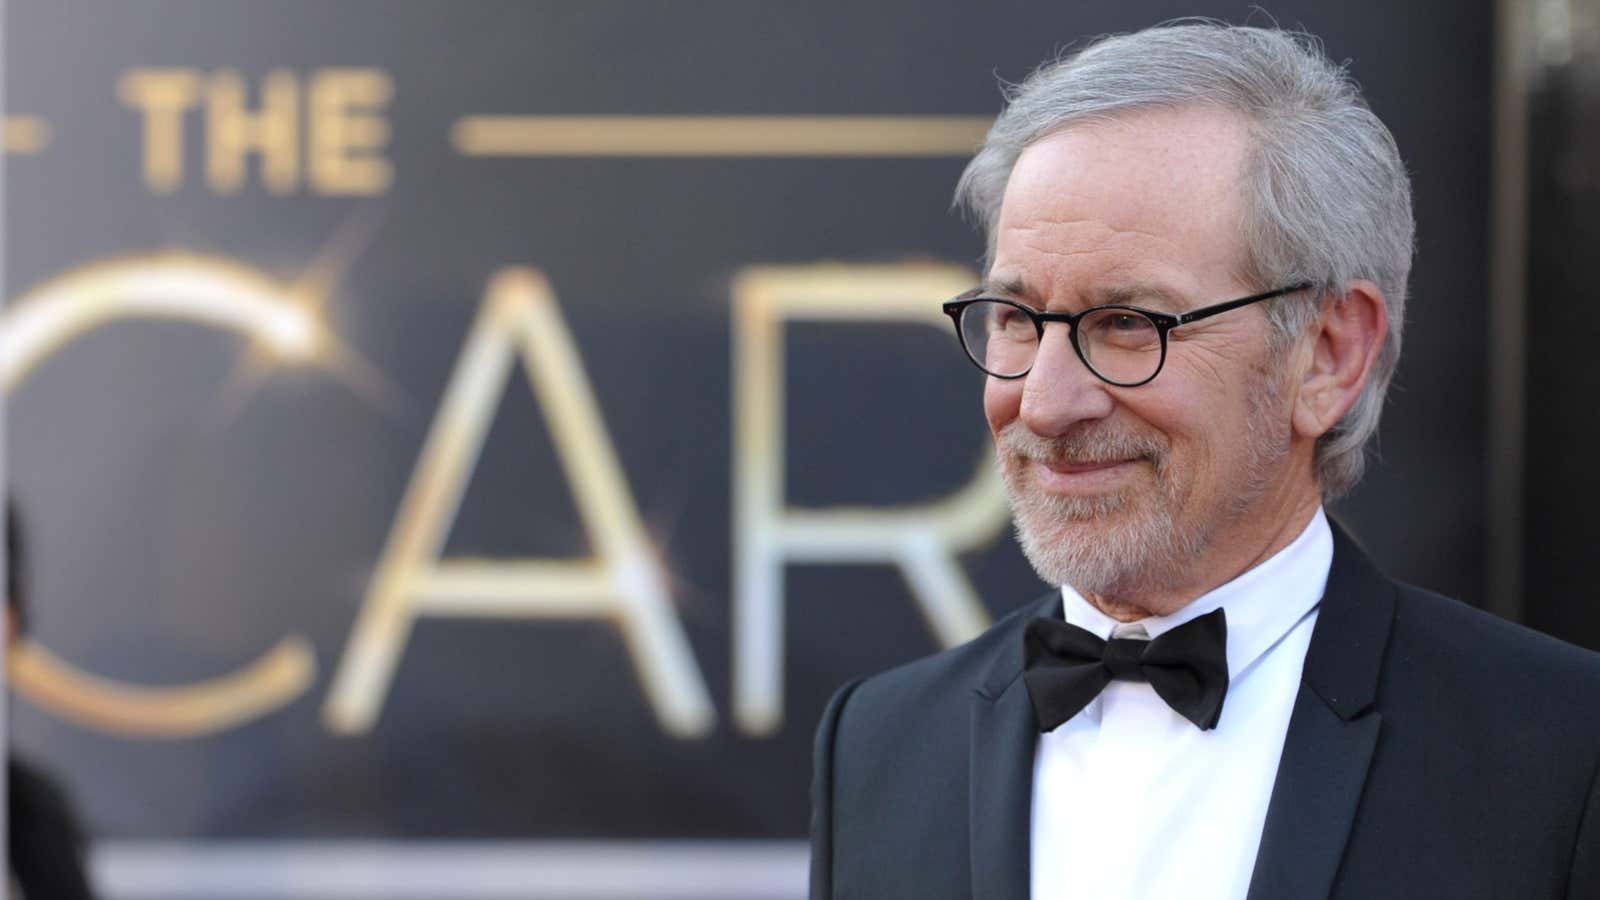 From “Jaws” to “Bridge of Spies,” Spielberg’s influence is enormous.